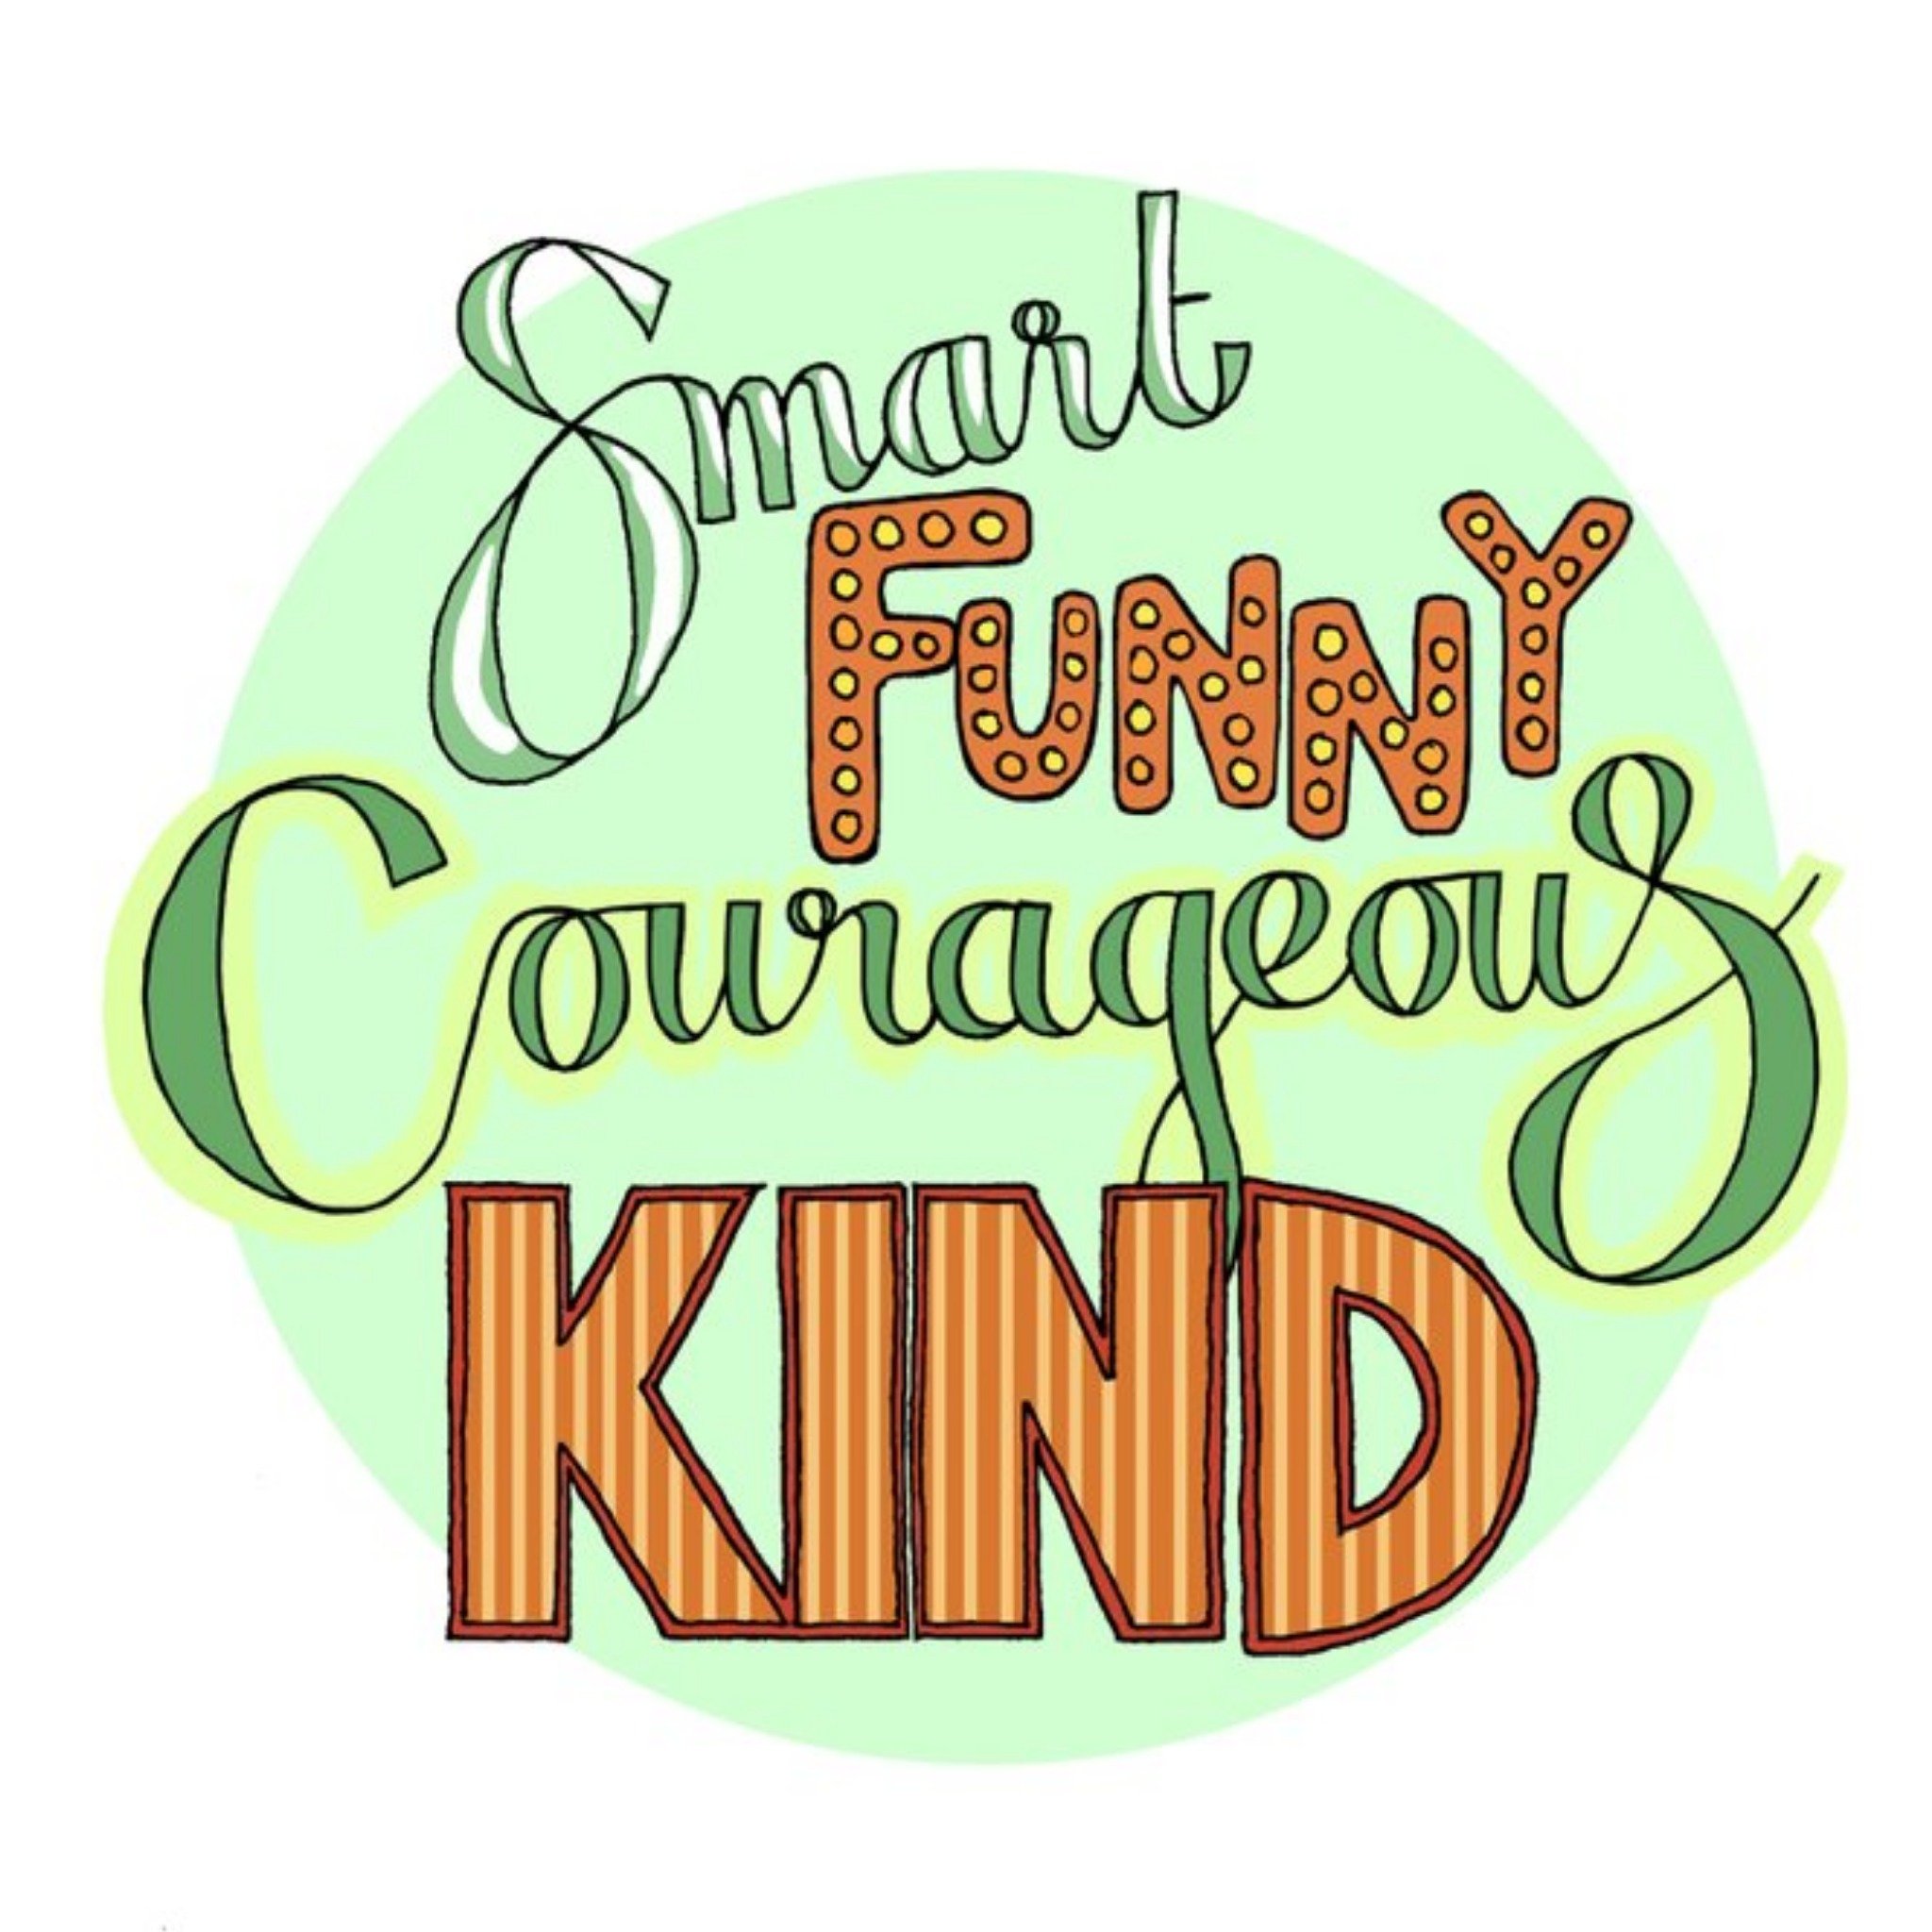 Moonpig Smart Funny Courageous Kind Card, Square